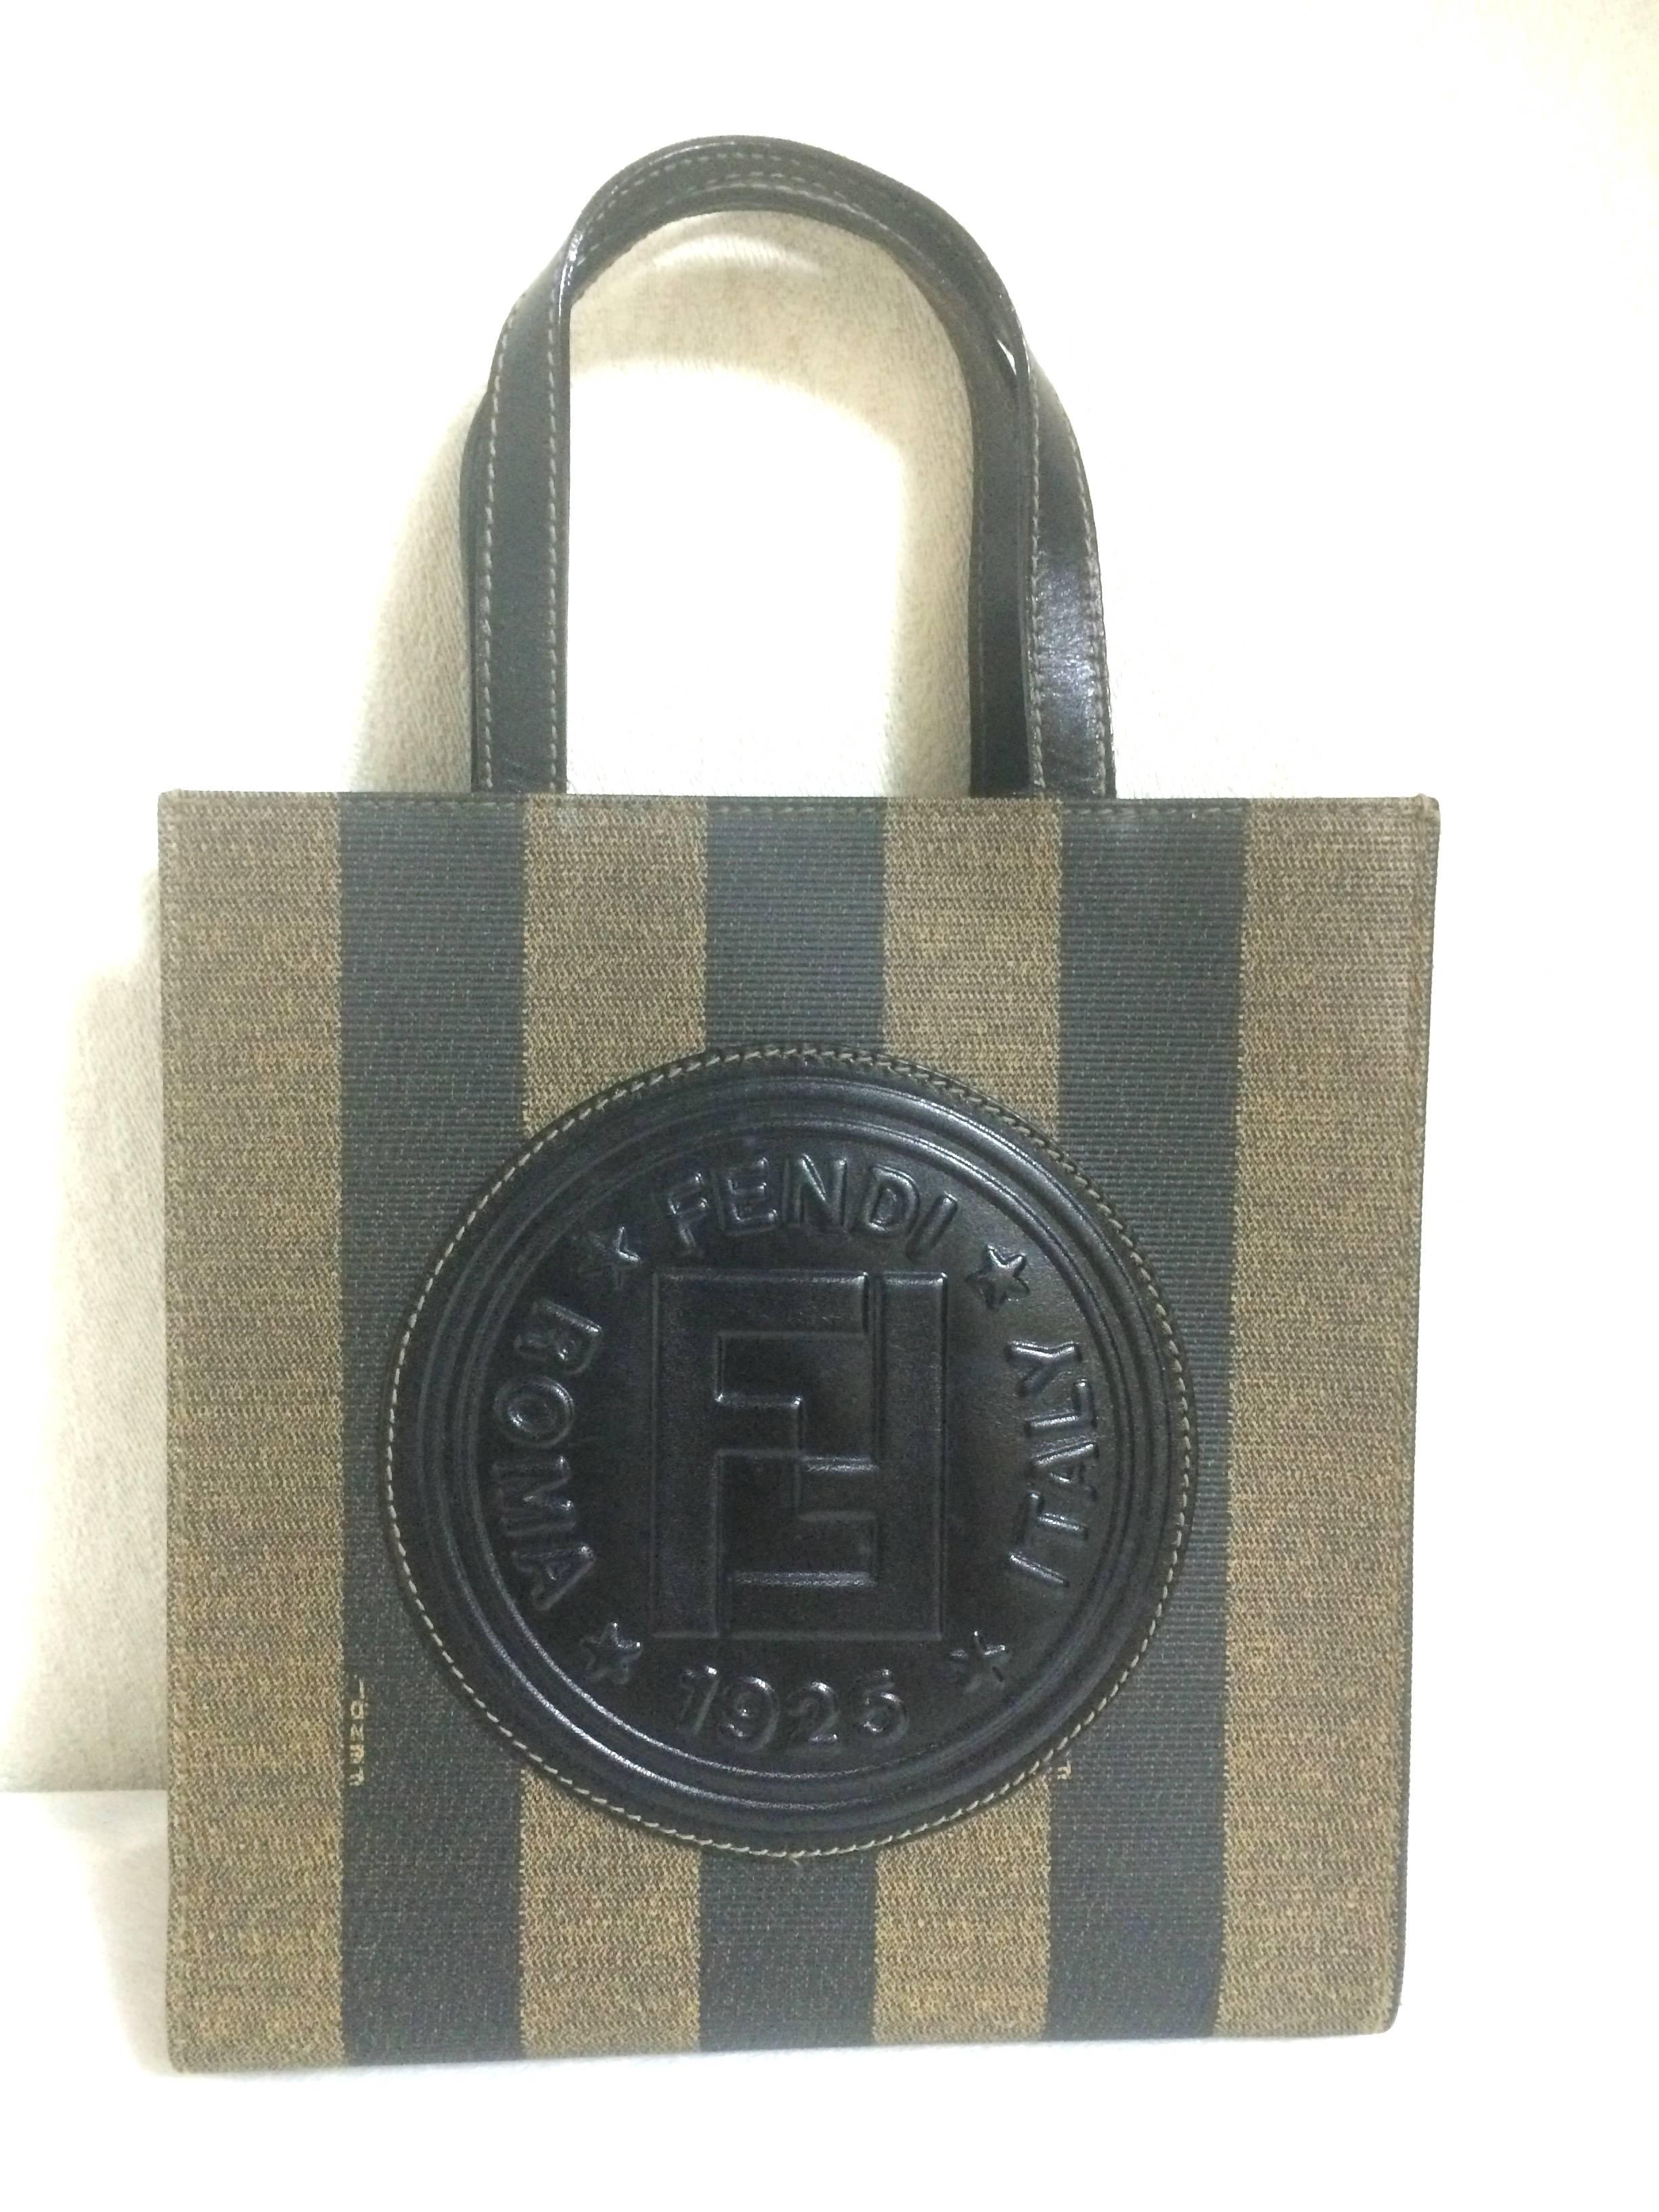 1990s. MINT. Vintage FENDI pecan khaki and black vertical stripe, mini shopping tote bag with a round leather logo mark. Unisex and daily use.

MINT condition!

For all Fendi vintage lovers, this early 90's vintage purse is the one for you!
You